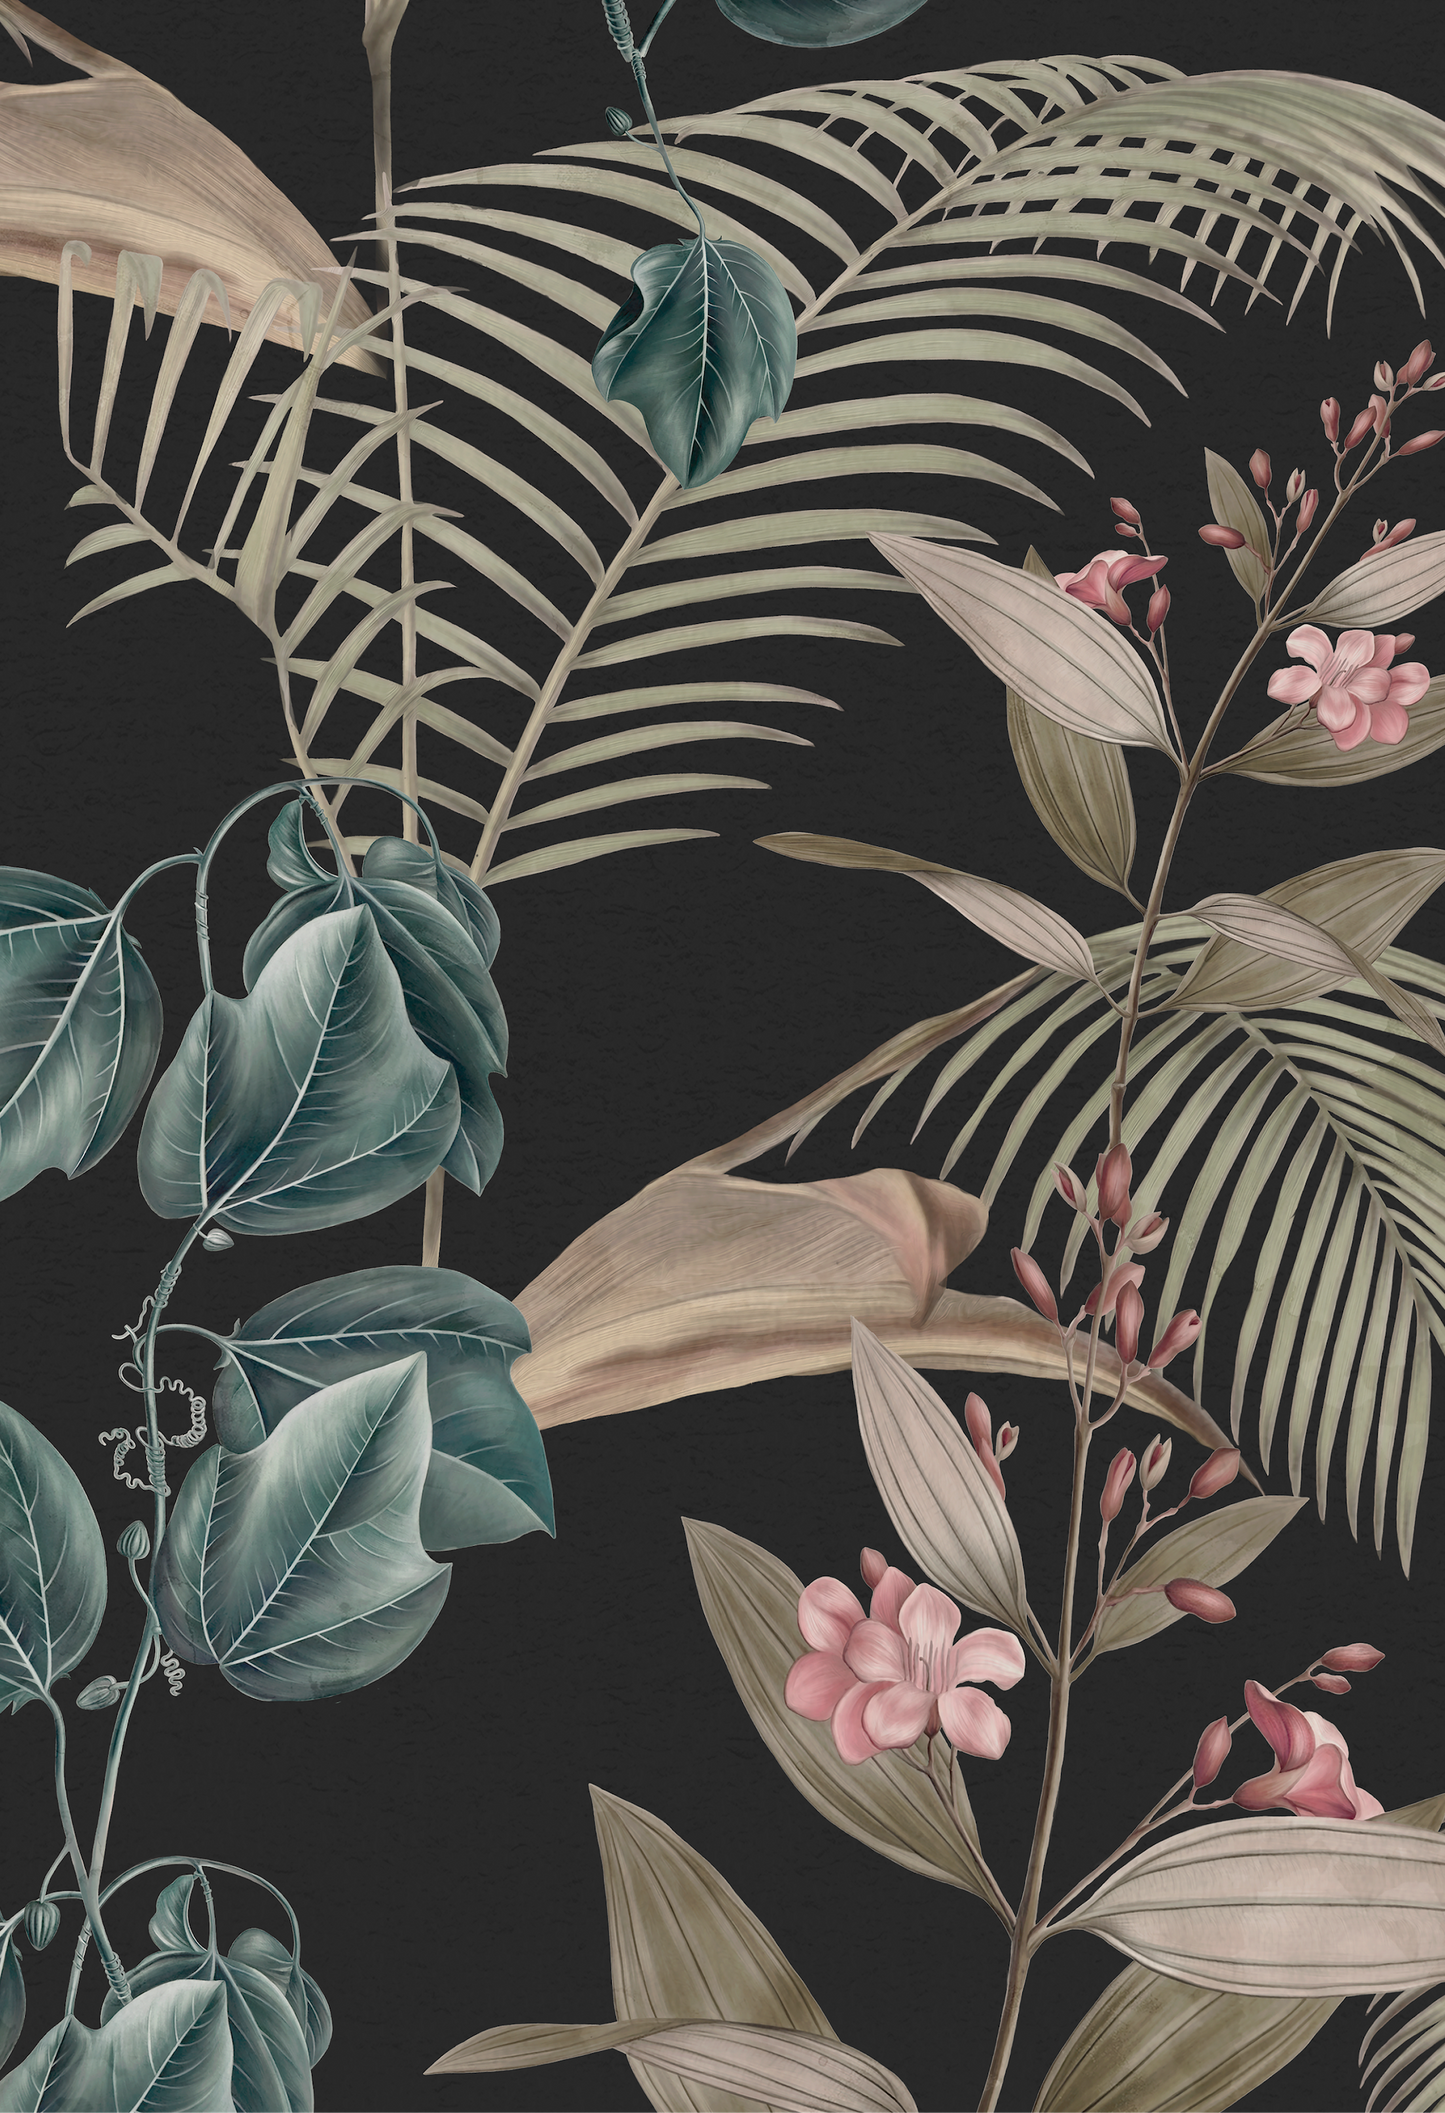 Tropical designer botanical illustration of ivy, palm leaves and florals on black background by Deus ex Gardenia of Wild Ivy Wallpaper in Dusk. 